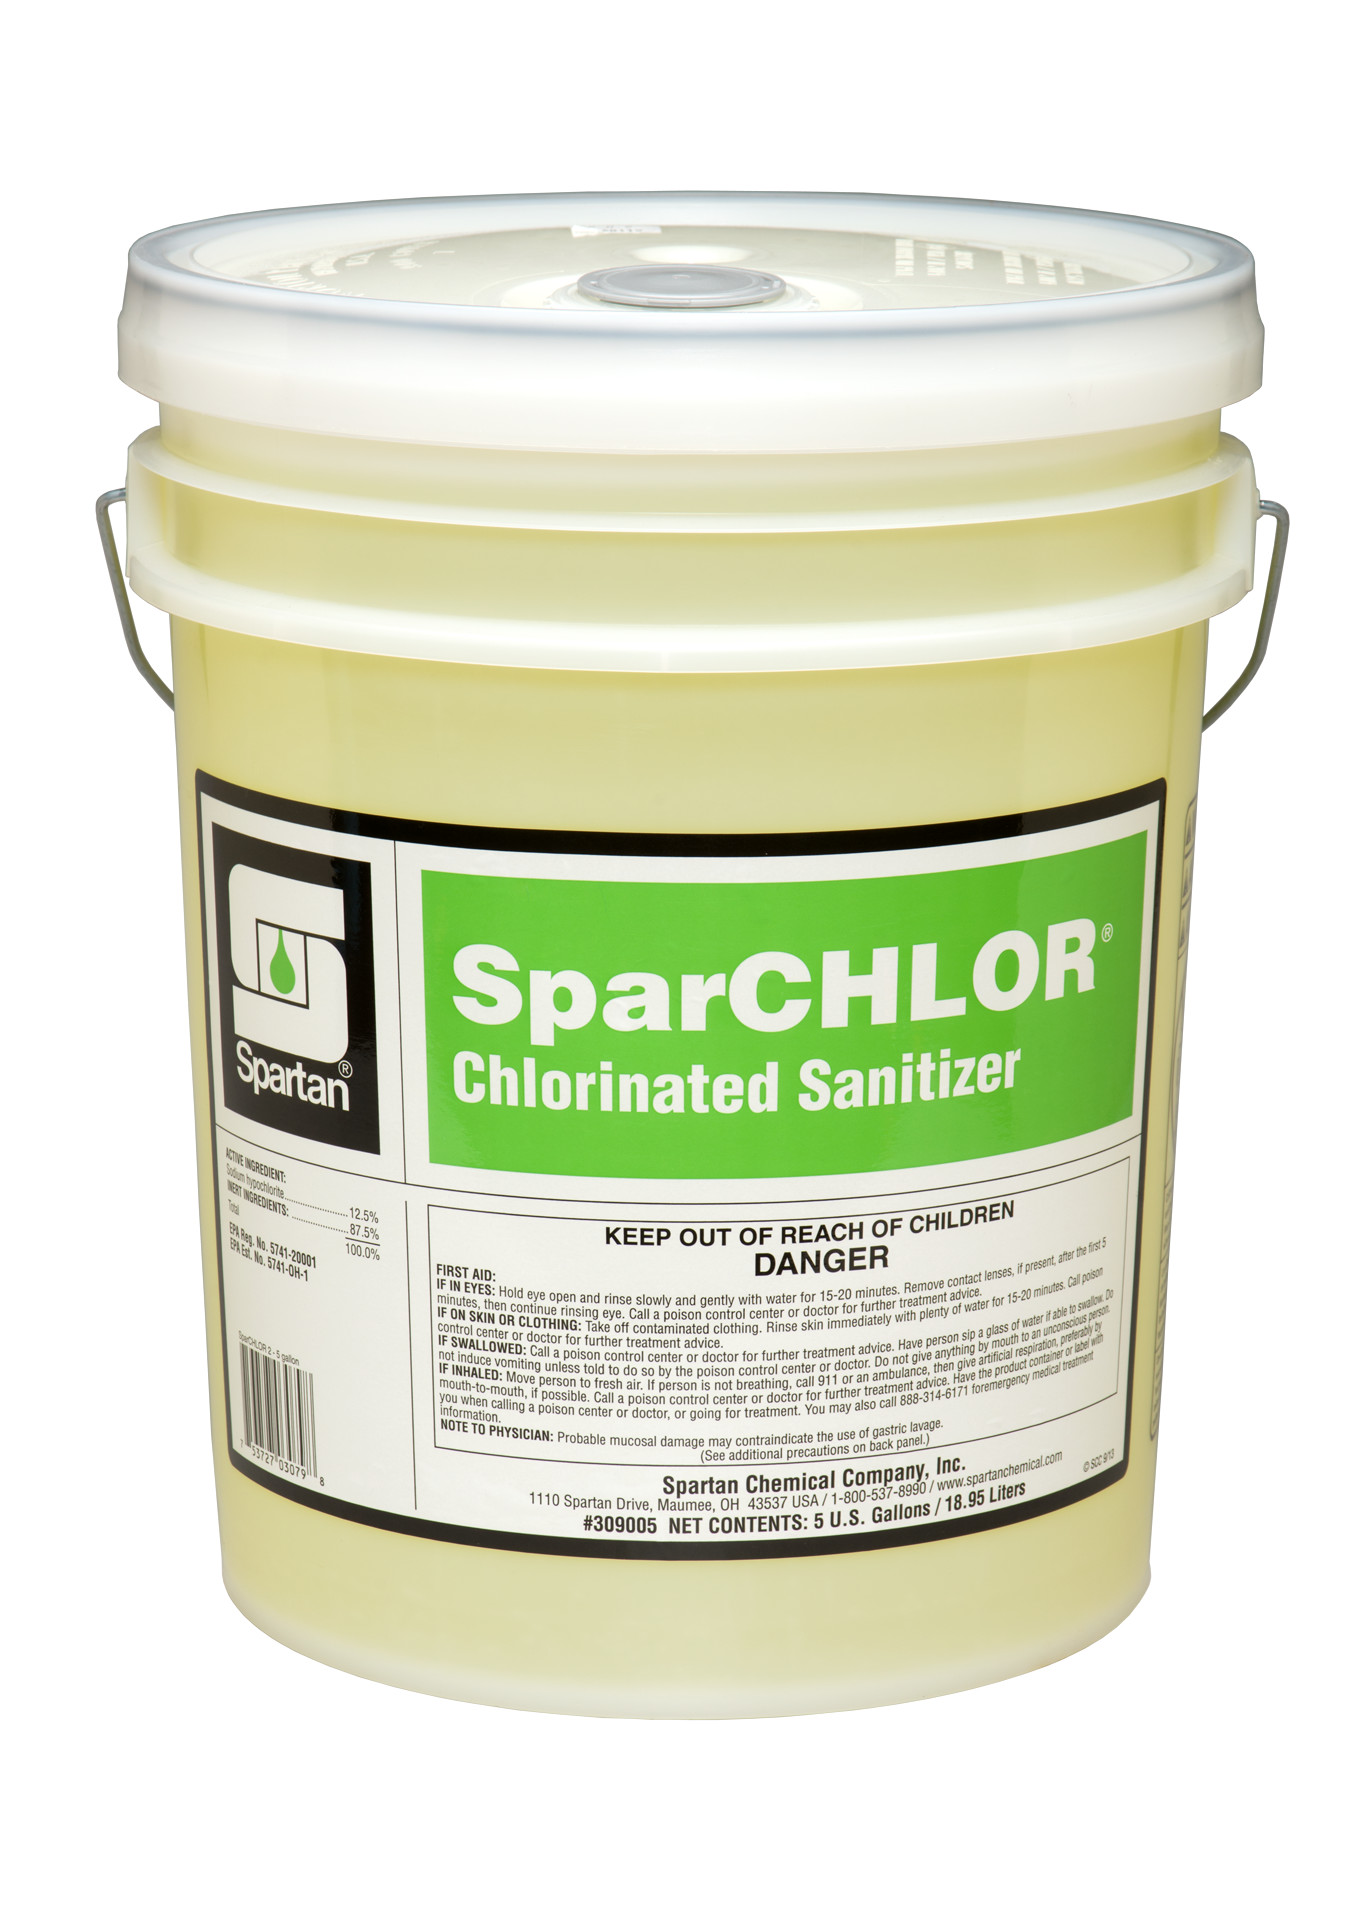 Spartan Chemical Company SparCHLOR, 5 GAL PAIL